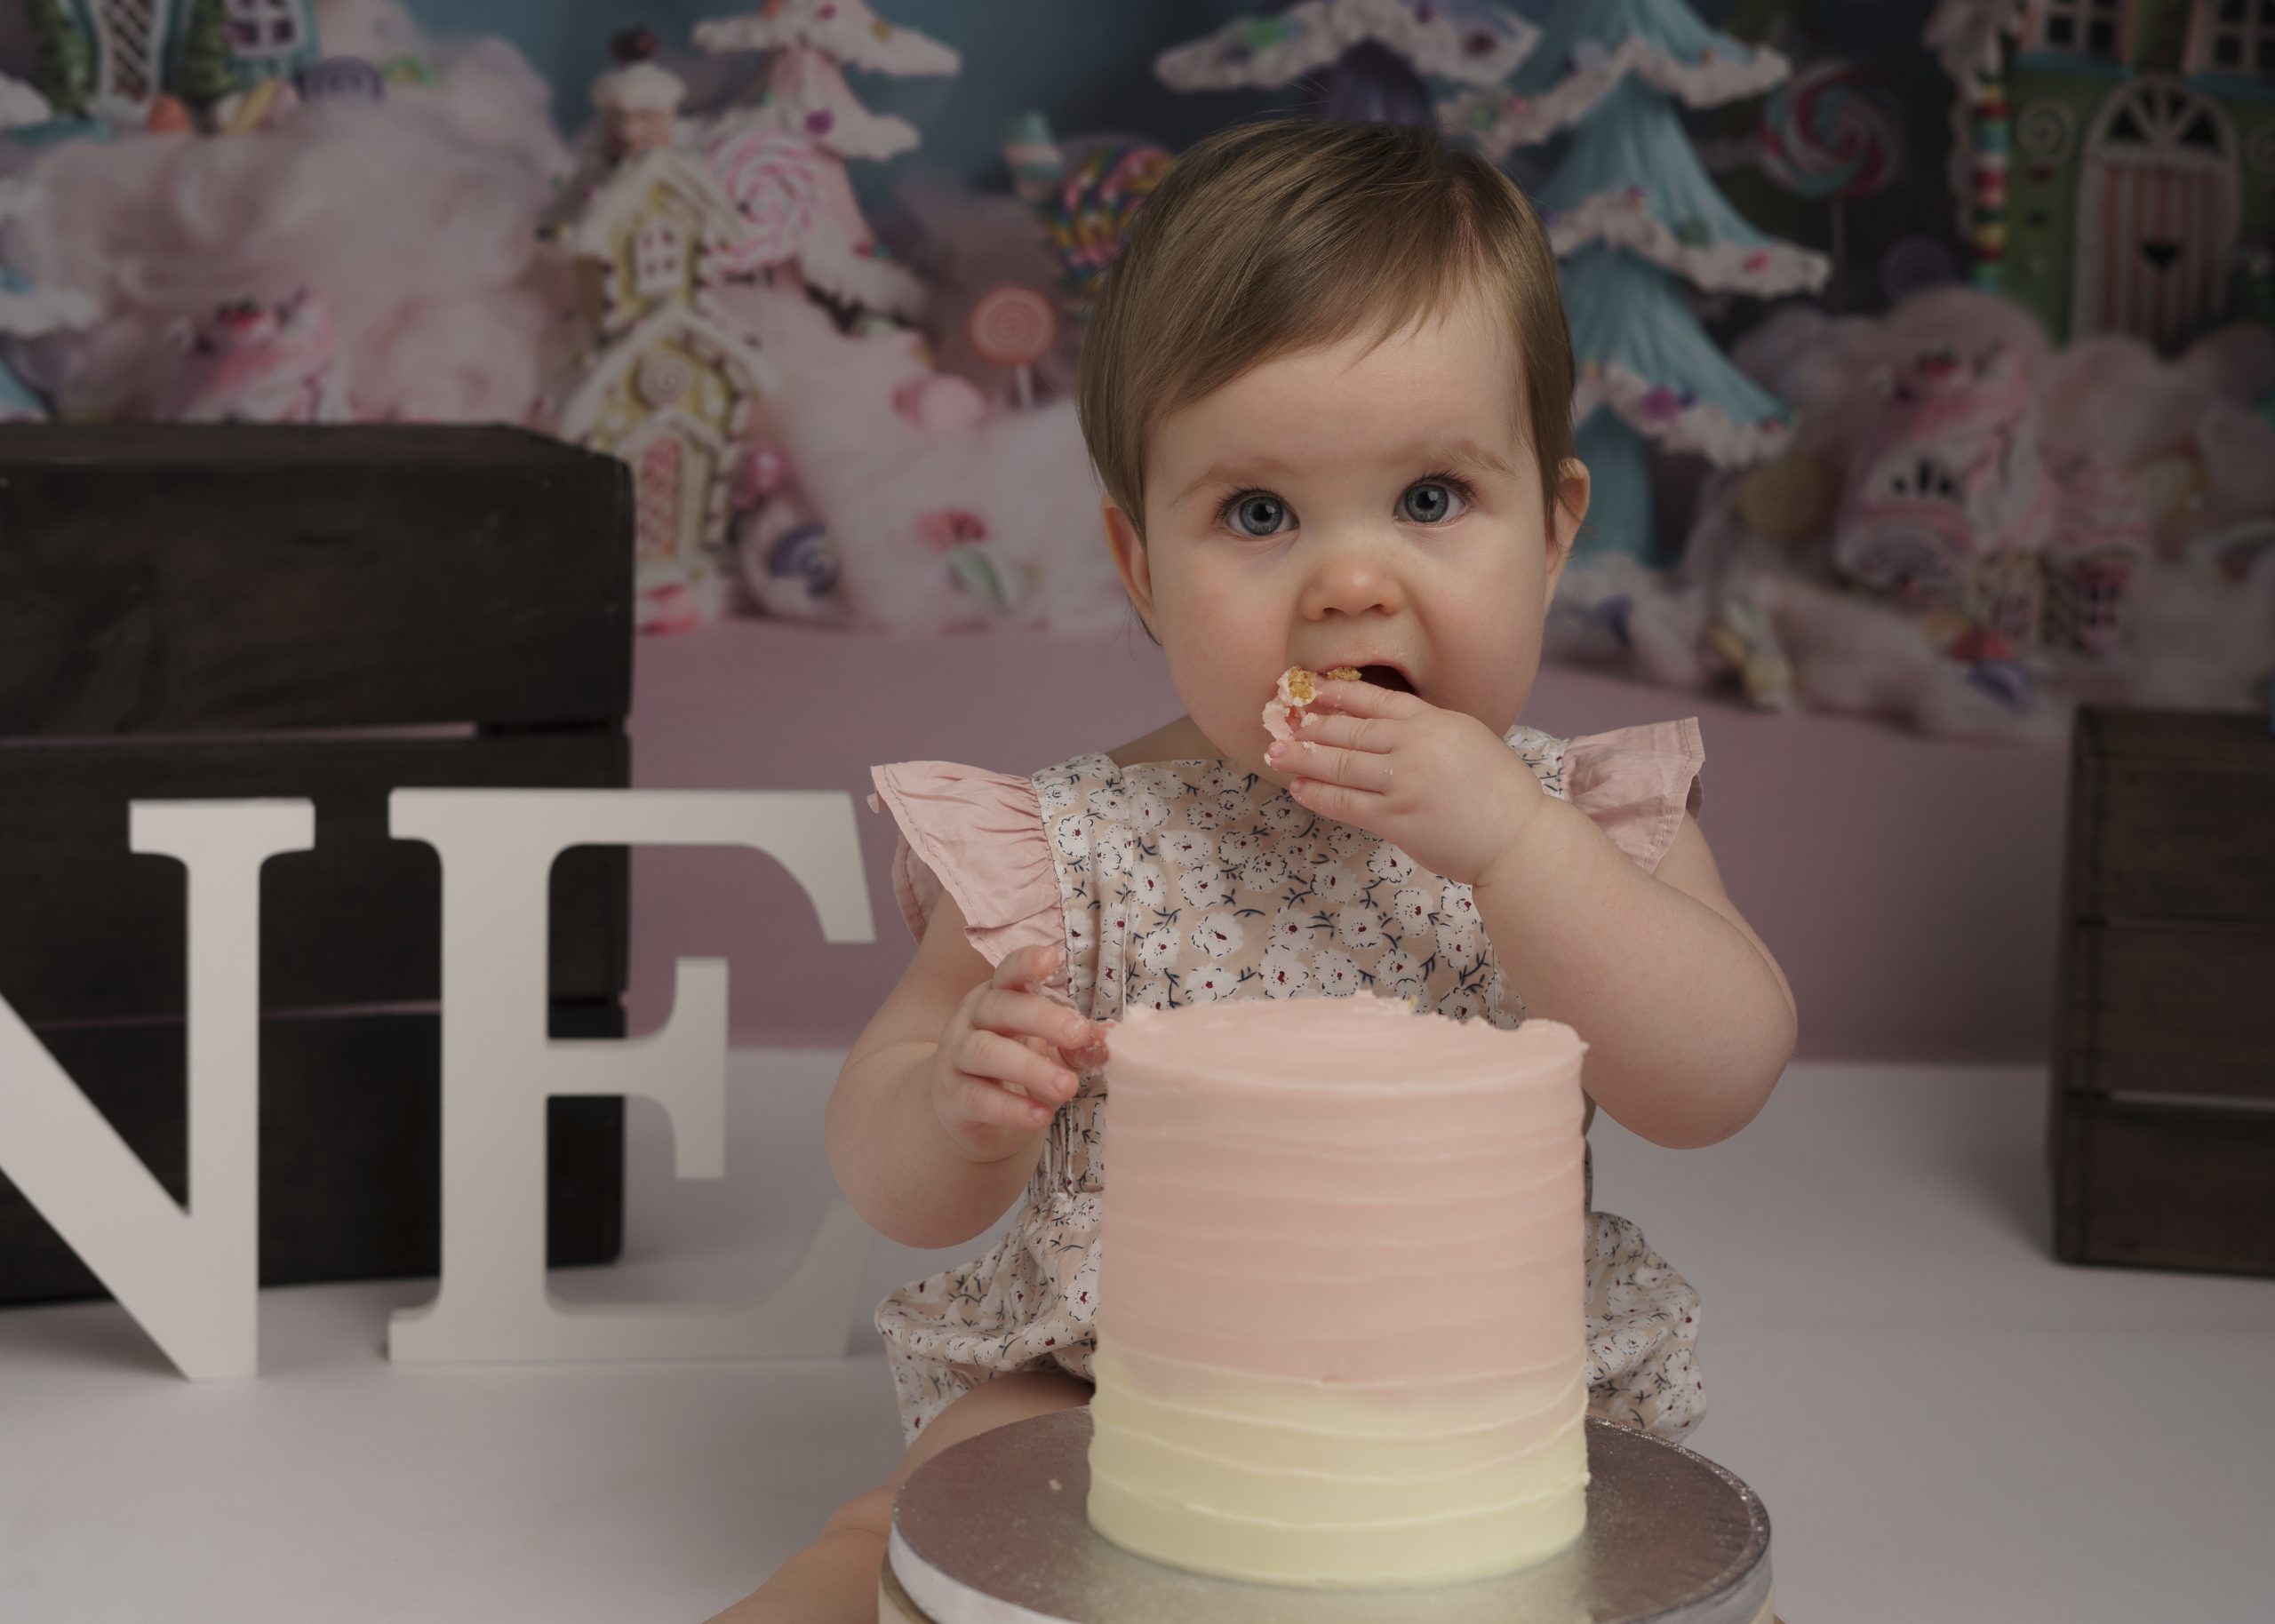 baby girl eating cake at a cake smash session by baby photographer stowmarket